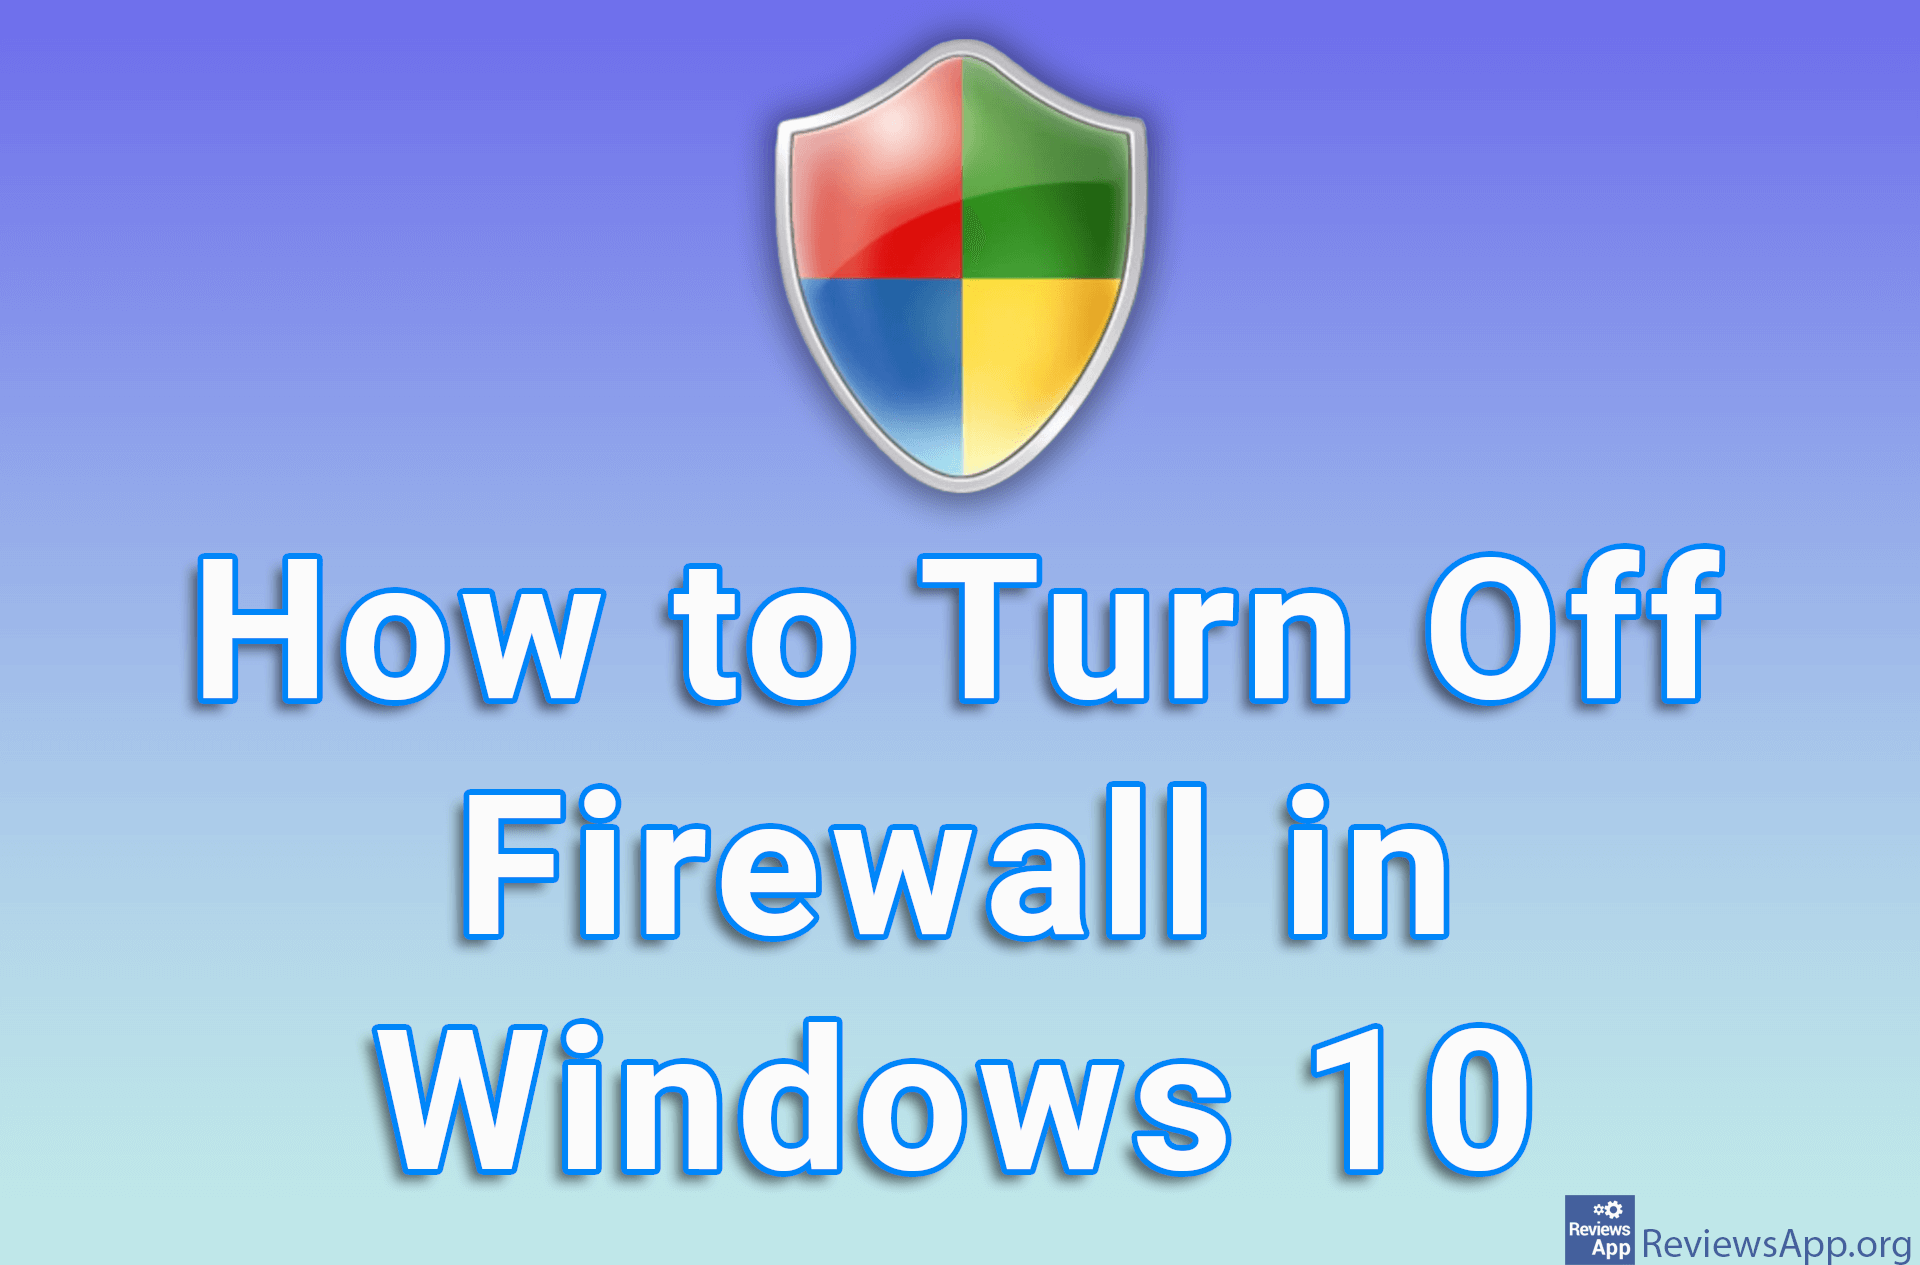 How to Turn Off Firewall in Windows 10